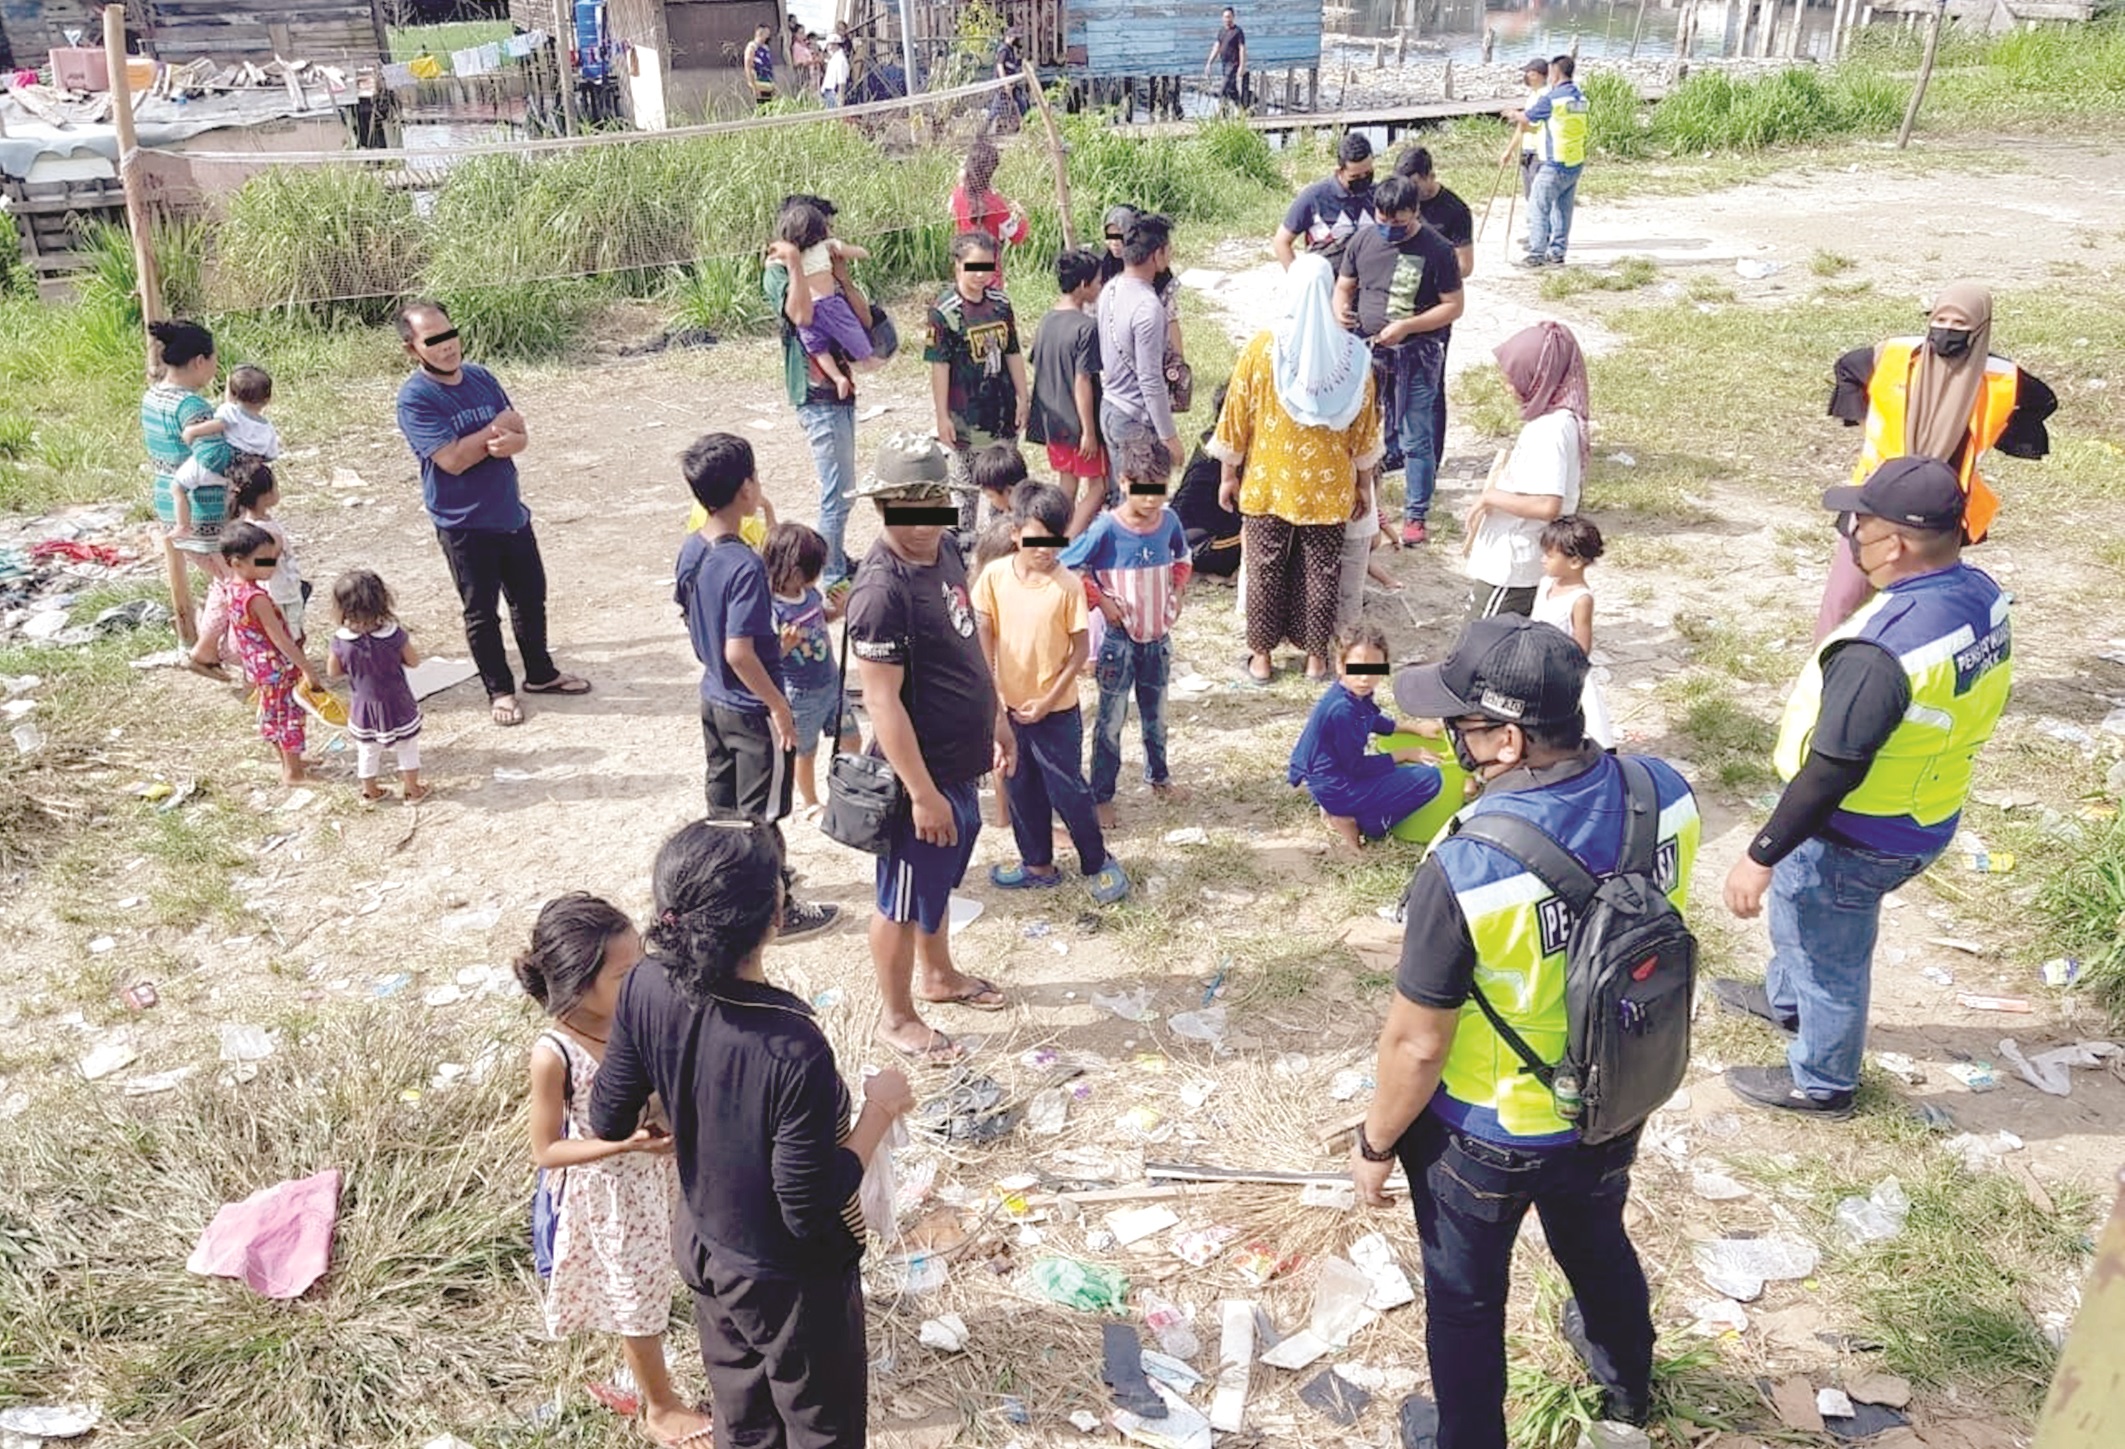 105 rounded up in op to clear Kota Kinabalu of vagrants